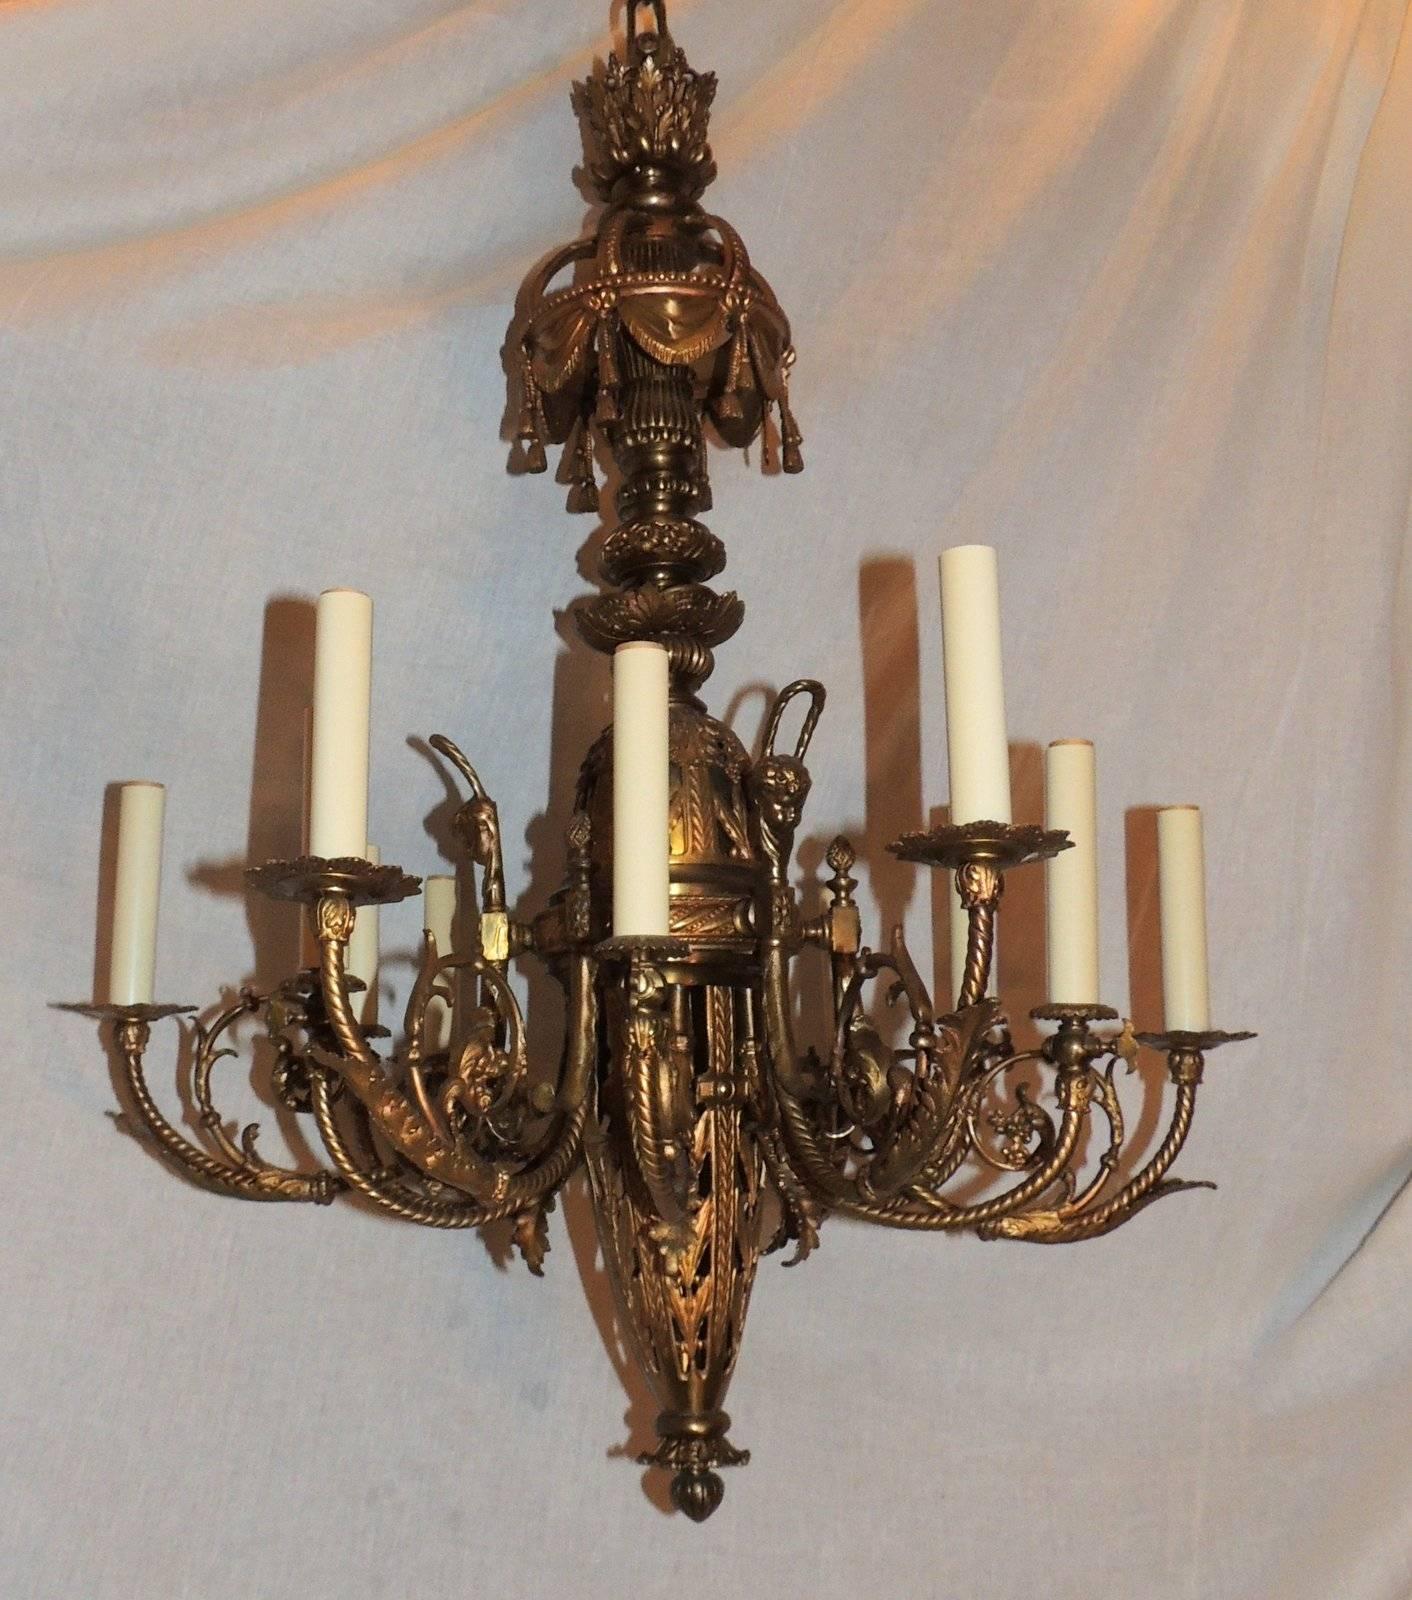 This wonderful doré bronze twelve-light chandelier has a wonderful top with draped swag, etched detail throughout and cherubs accenting the top.
Measures: 24